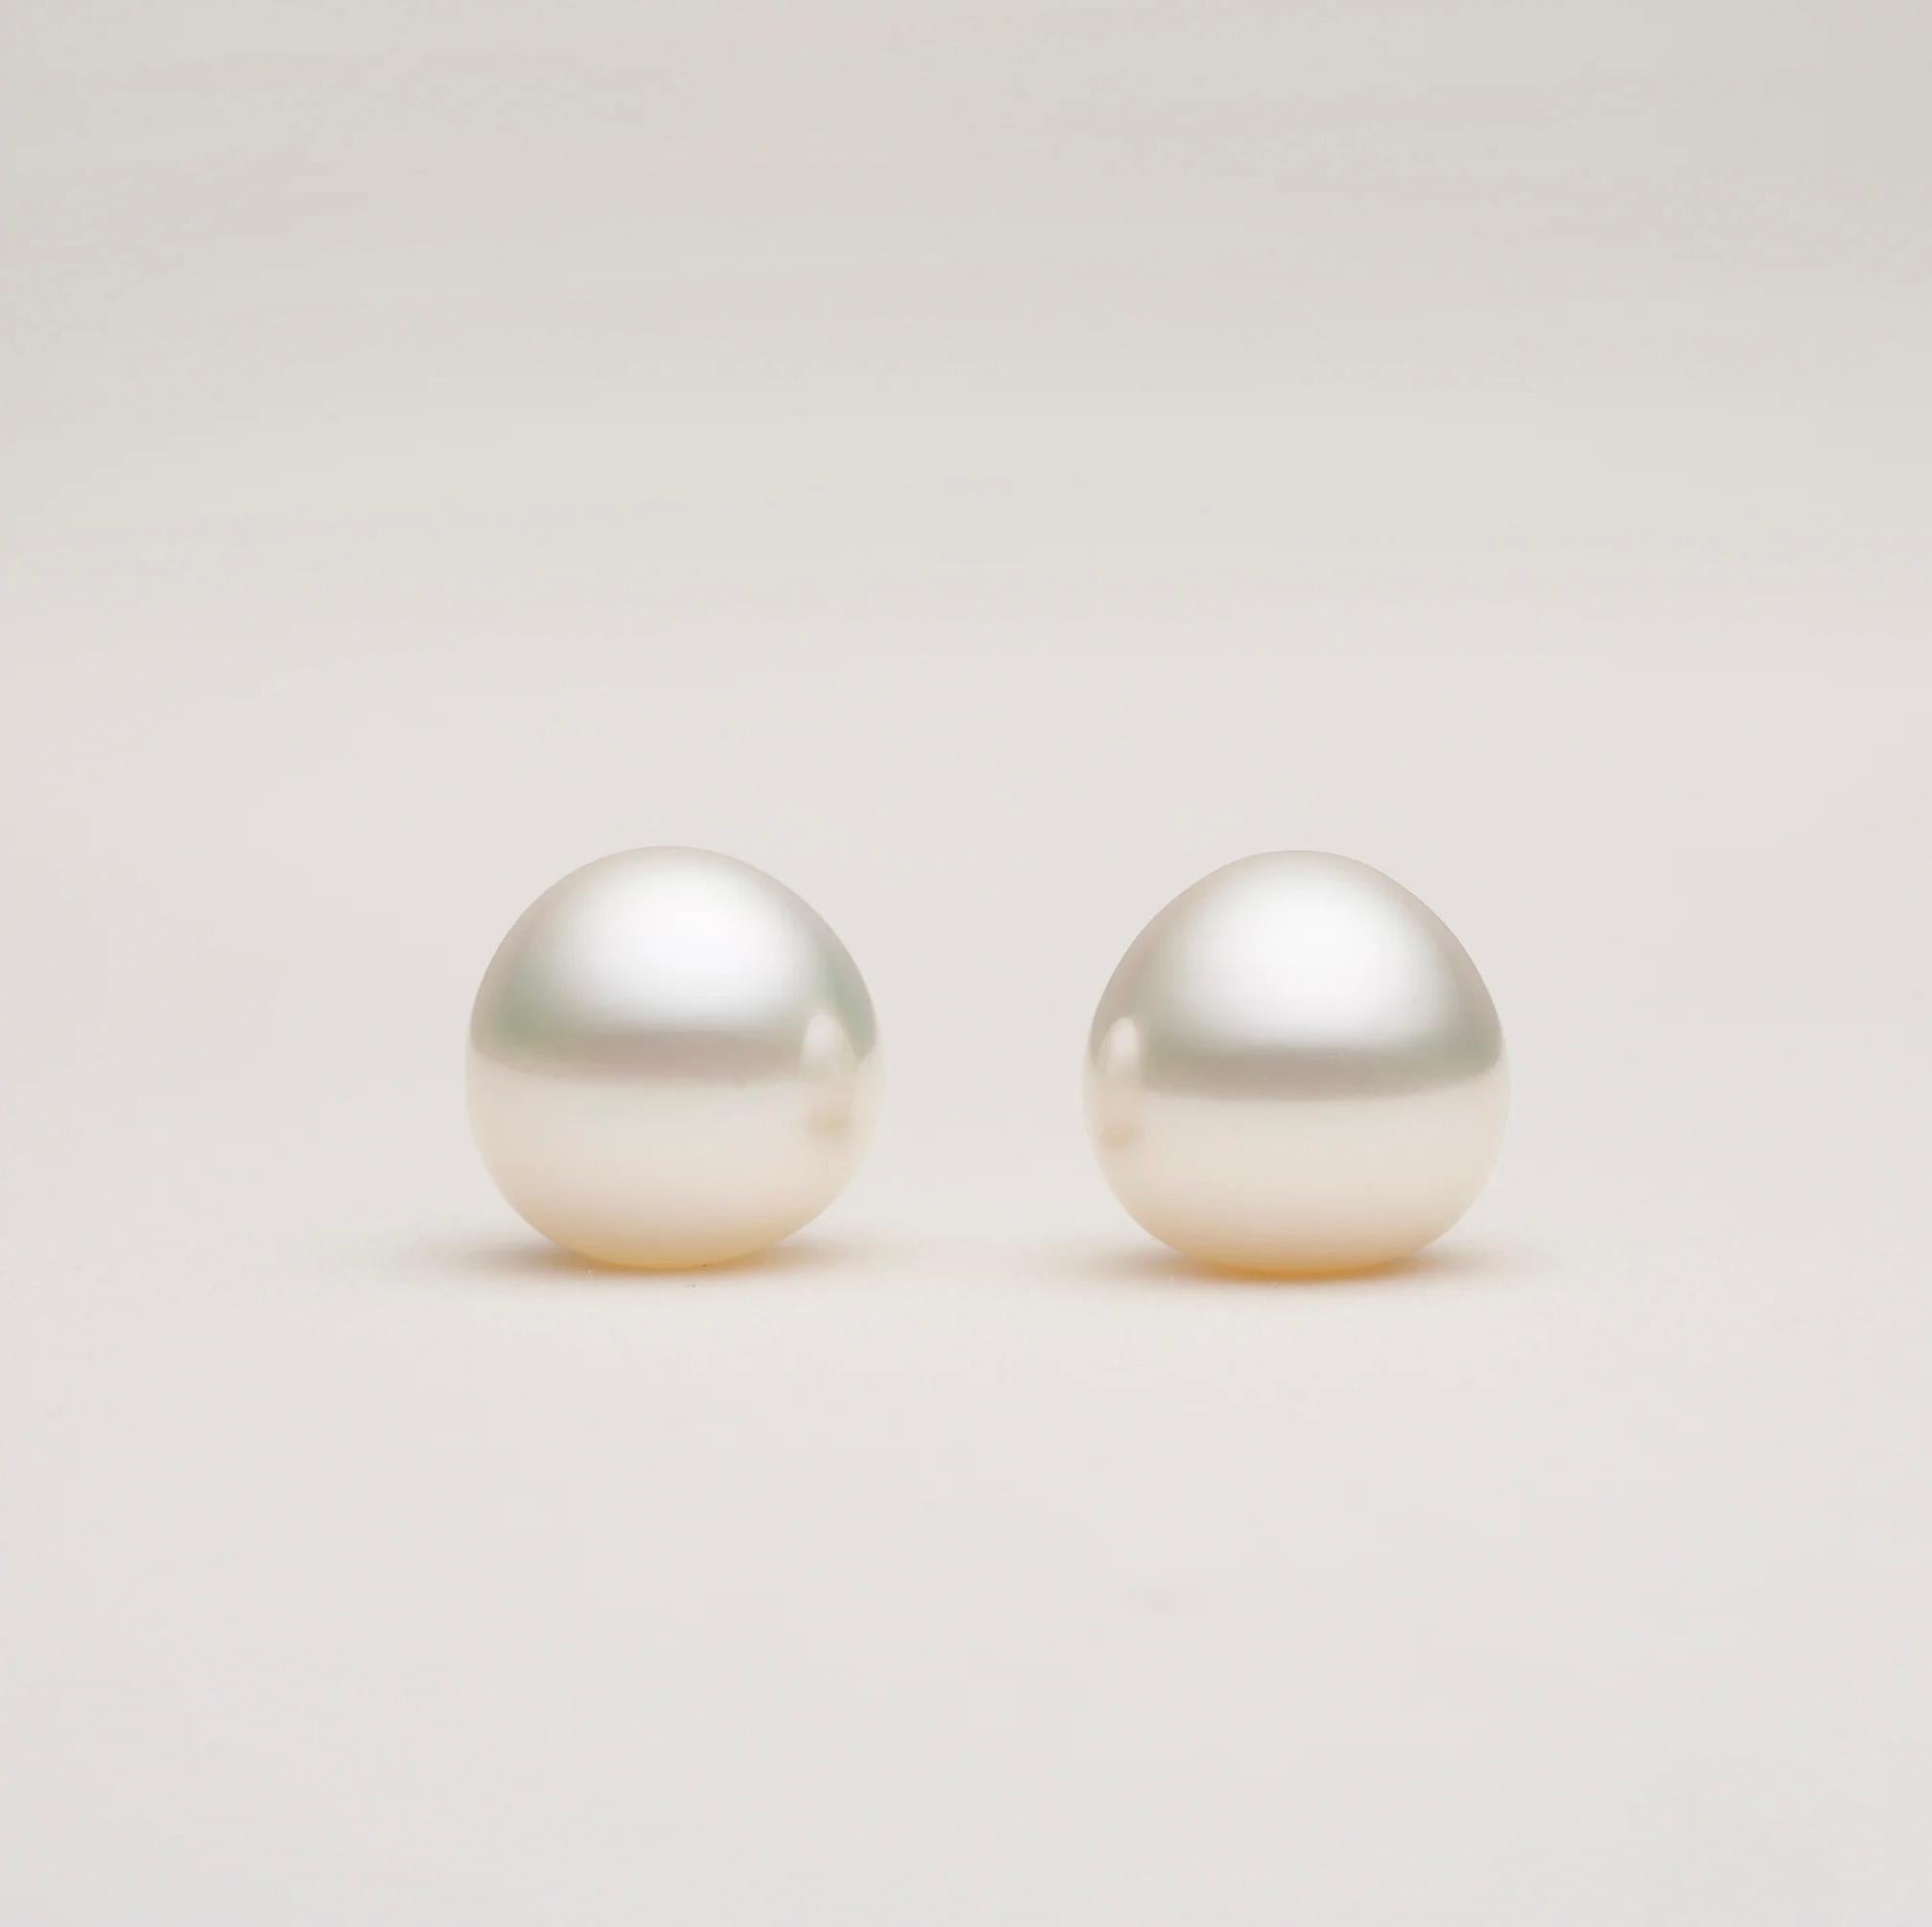 PAIR OF triangle 12 MM PEARLS, FLAWLESS COMPLEXION, AA LUSTRE, WHITE WITH GREEN OVERTONE.


GUARANTEED NATURAL COLOUR AND LUSTRE

These pearls display their natural colour and lustre and have not been subjected to chemical enhancements or